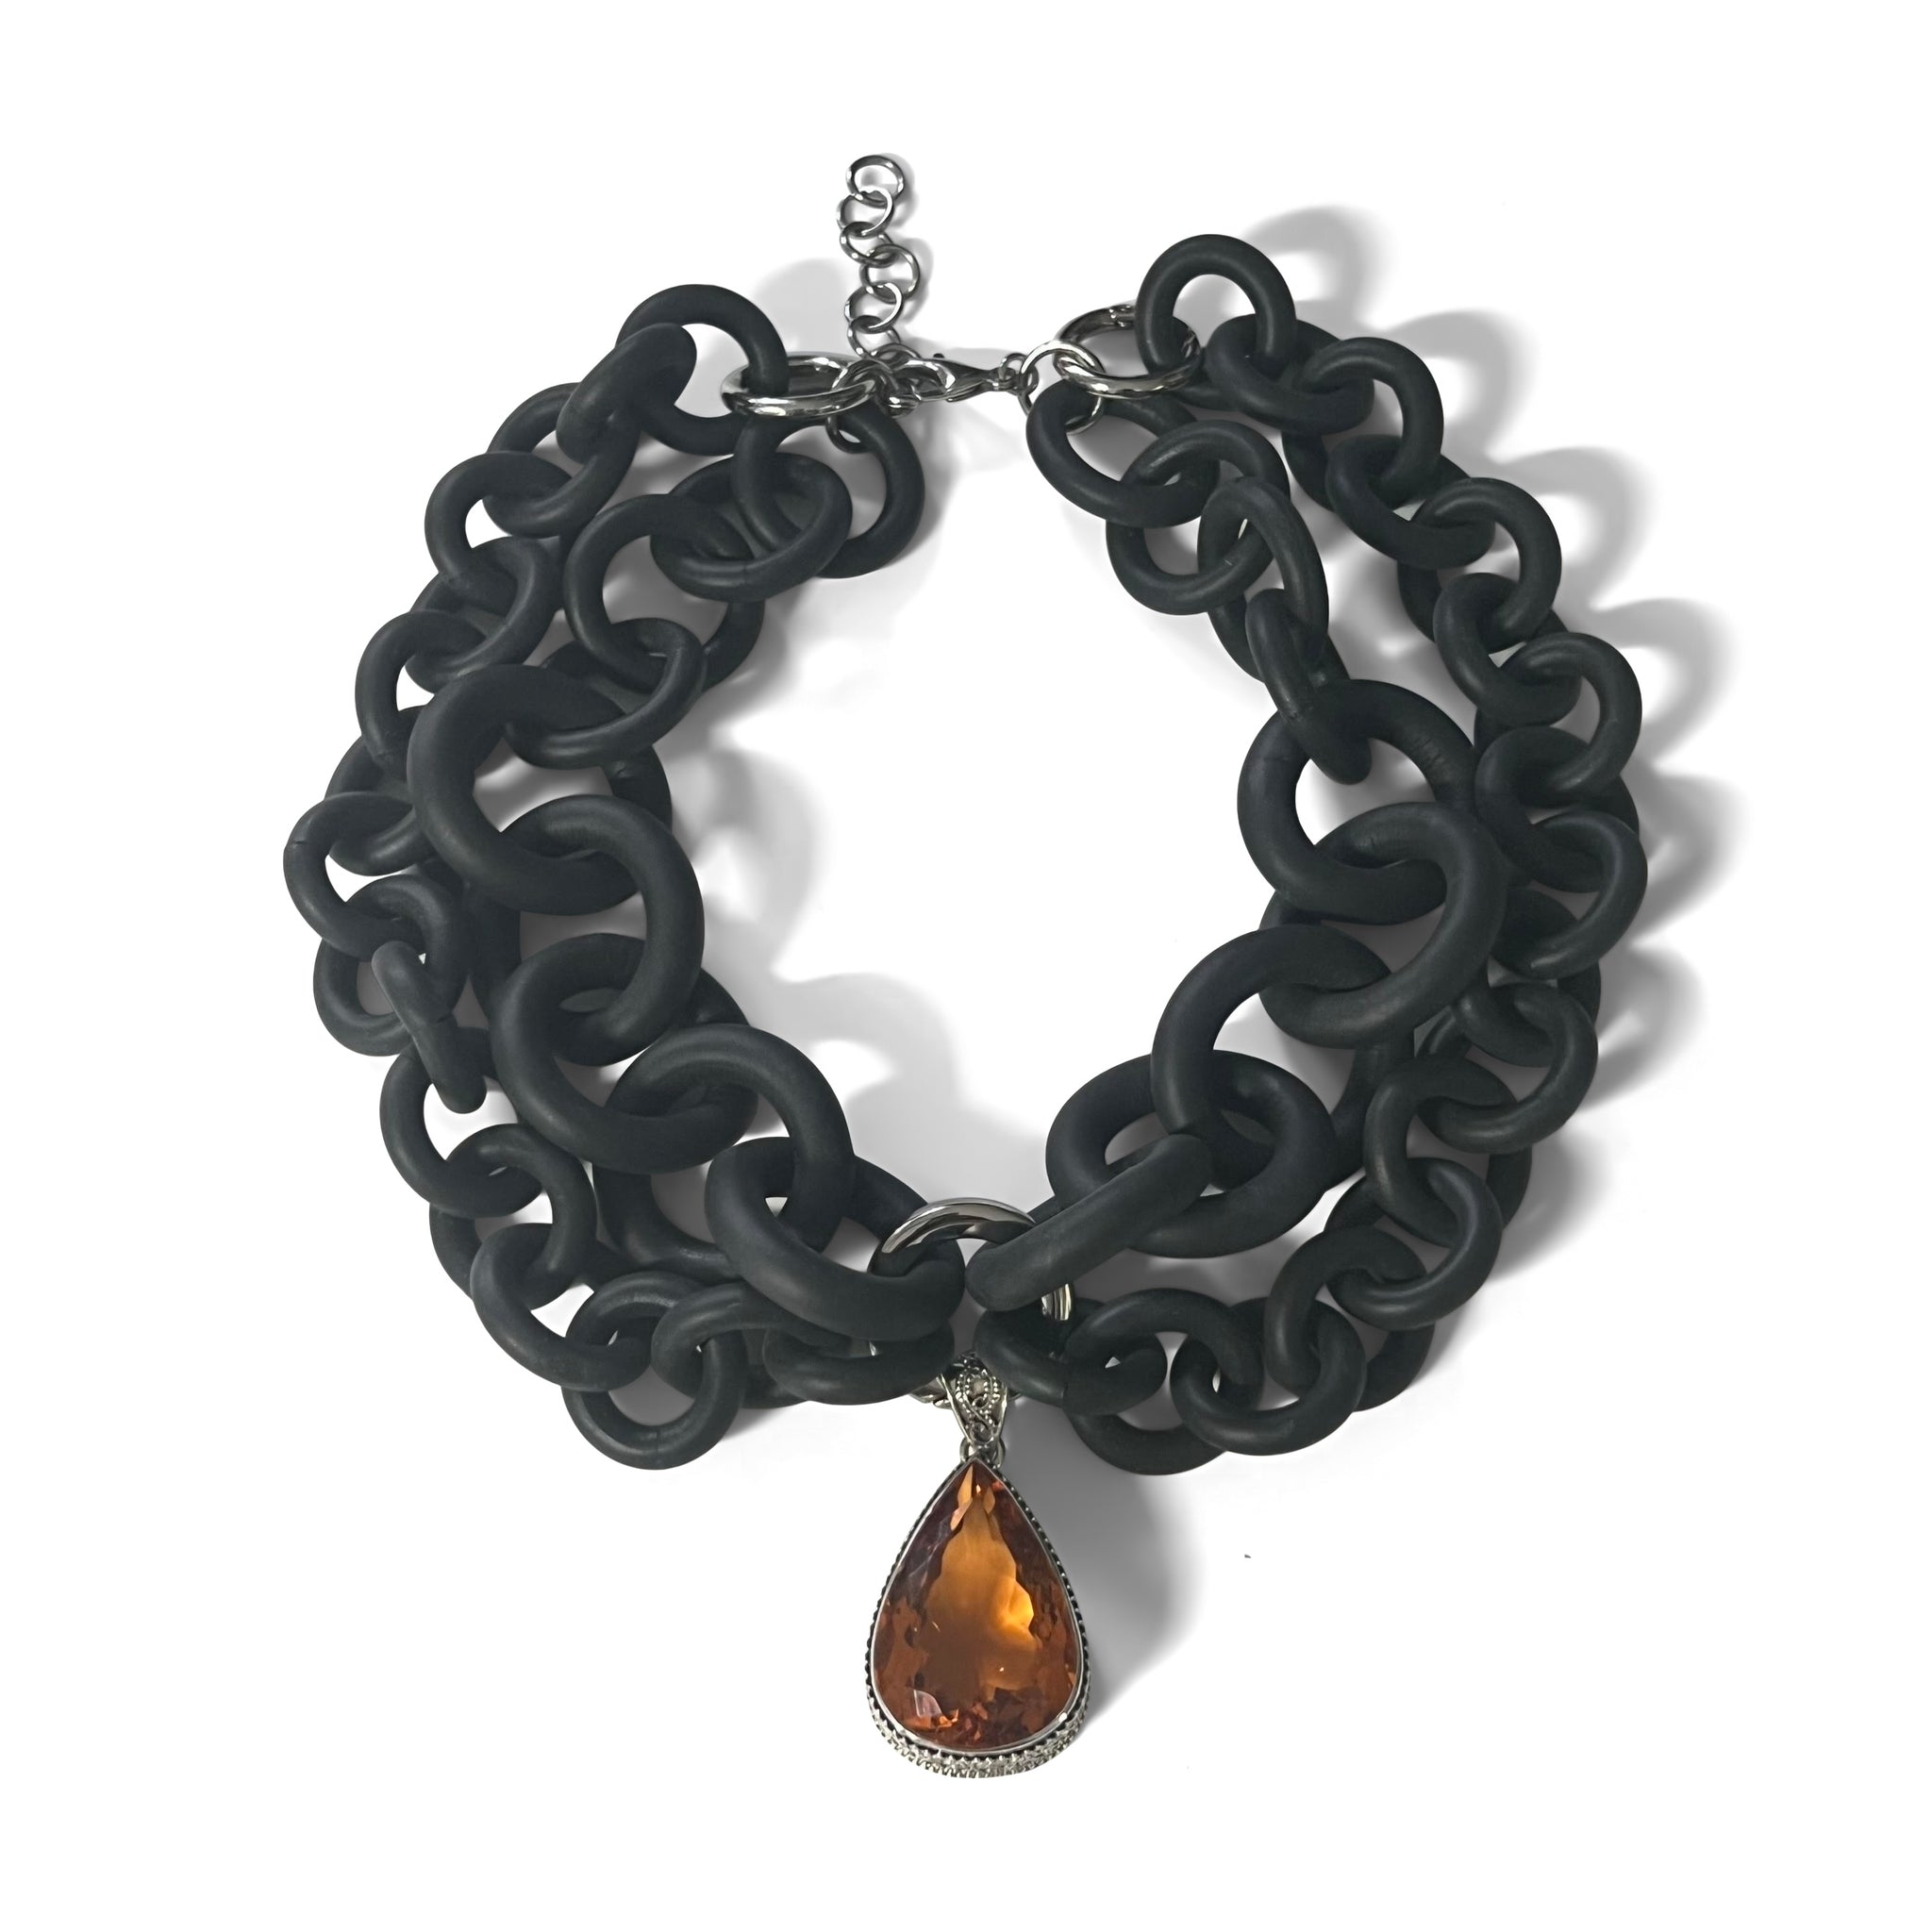 2-STRAND BLACK RUBBER NECKLACE WITH AN ORANGE QUARTZ STONE WRAPPED IN FILIGREE SILVER. by NYET Jewelry.